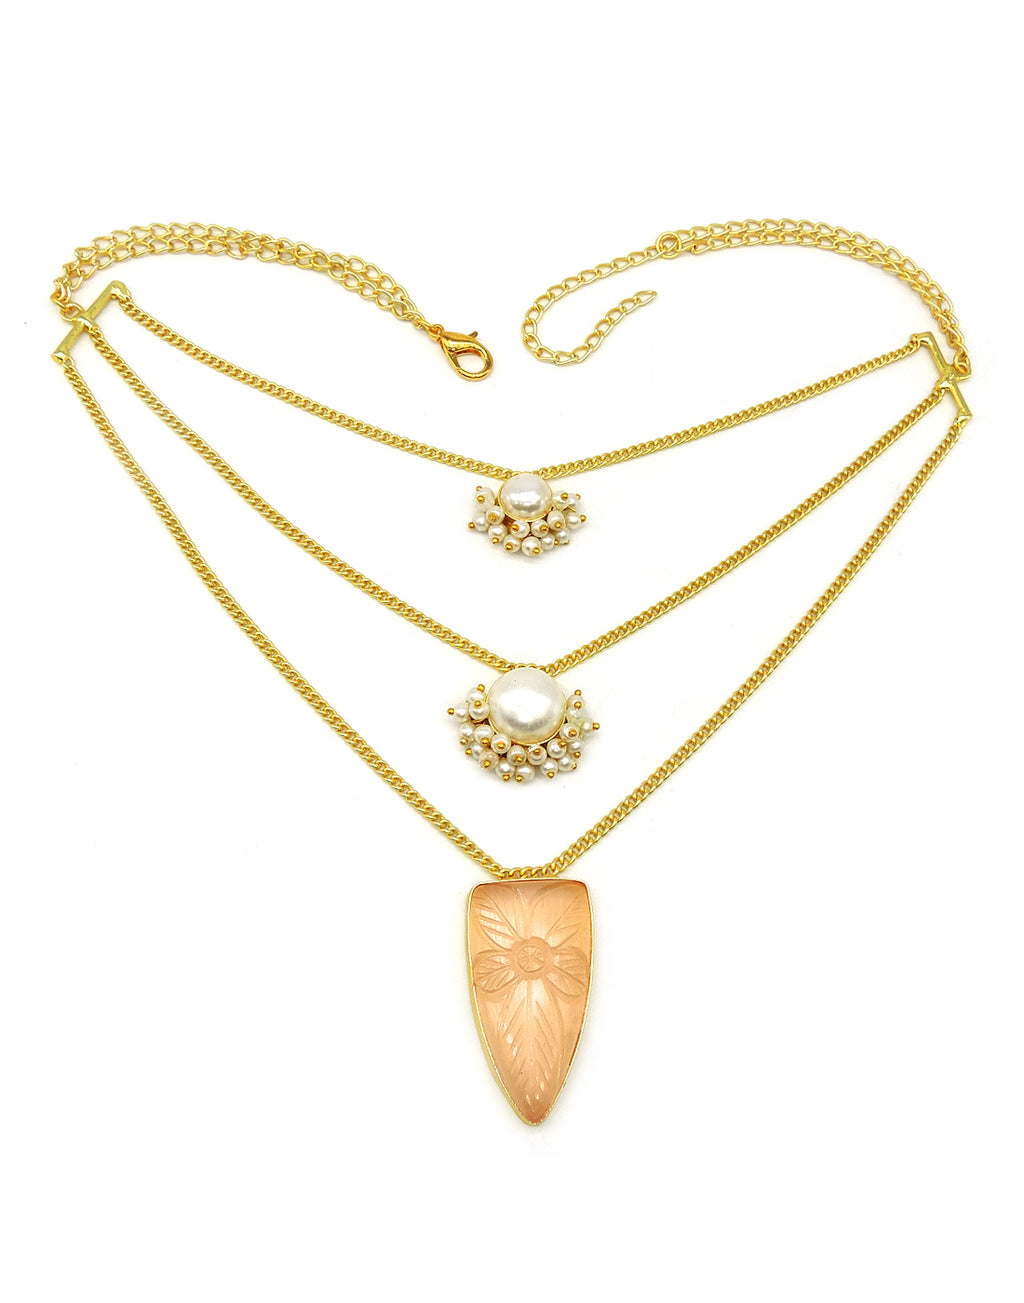 Layered Pearl Necklace - Statement Necklaces - Gold-Plated & Hypoallergenic Jewellery - Made in India - Dubai Jewellery - Dori